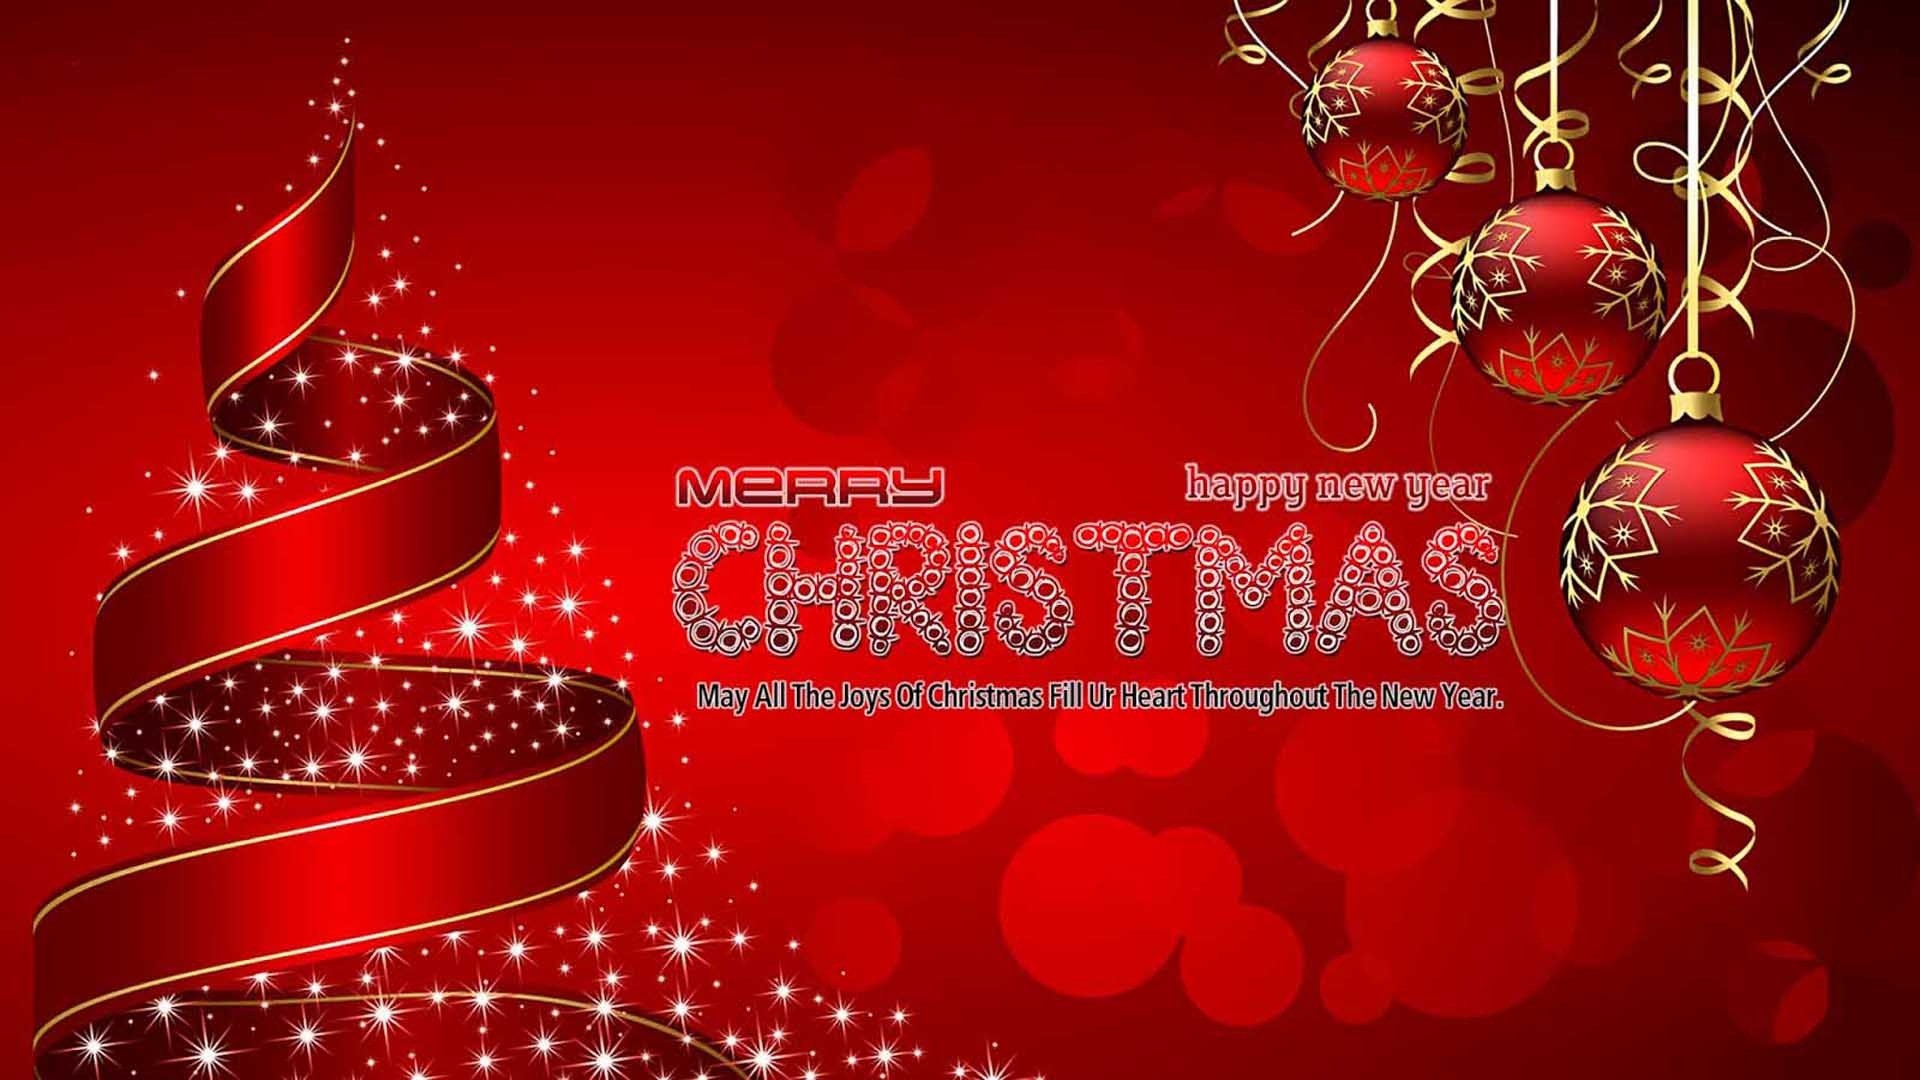 Merry Christmas 2018 Wallpaper 69 Images